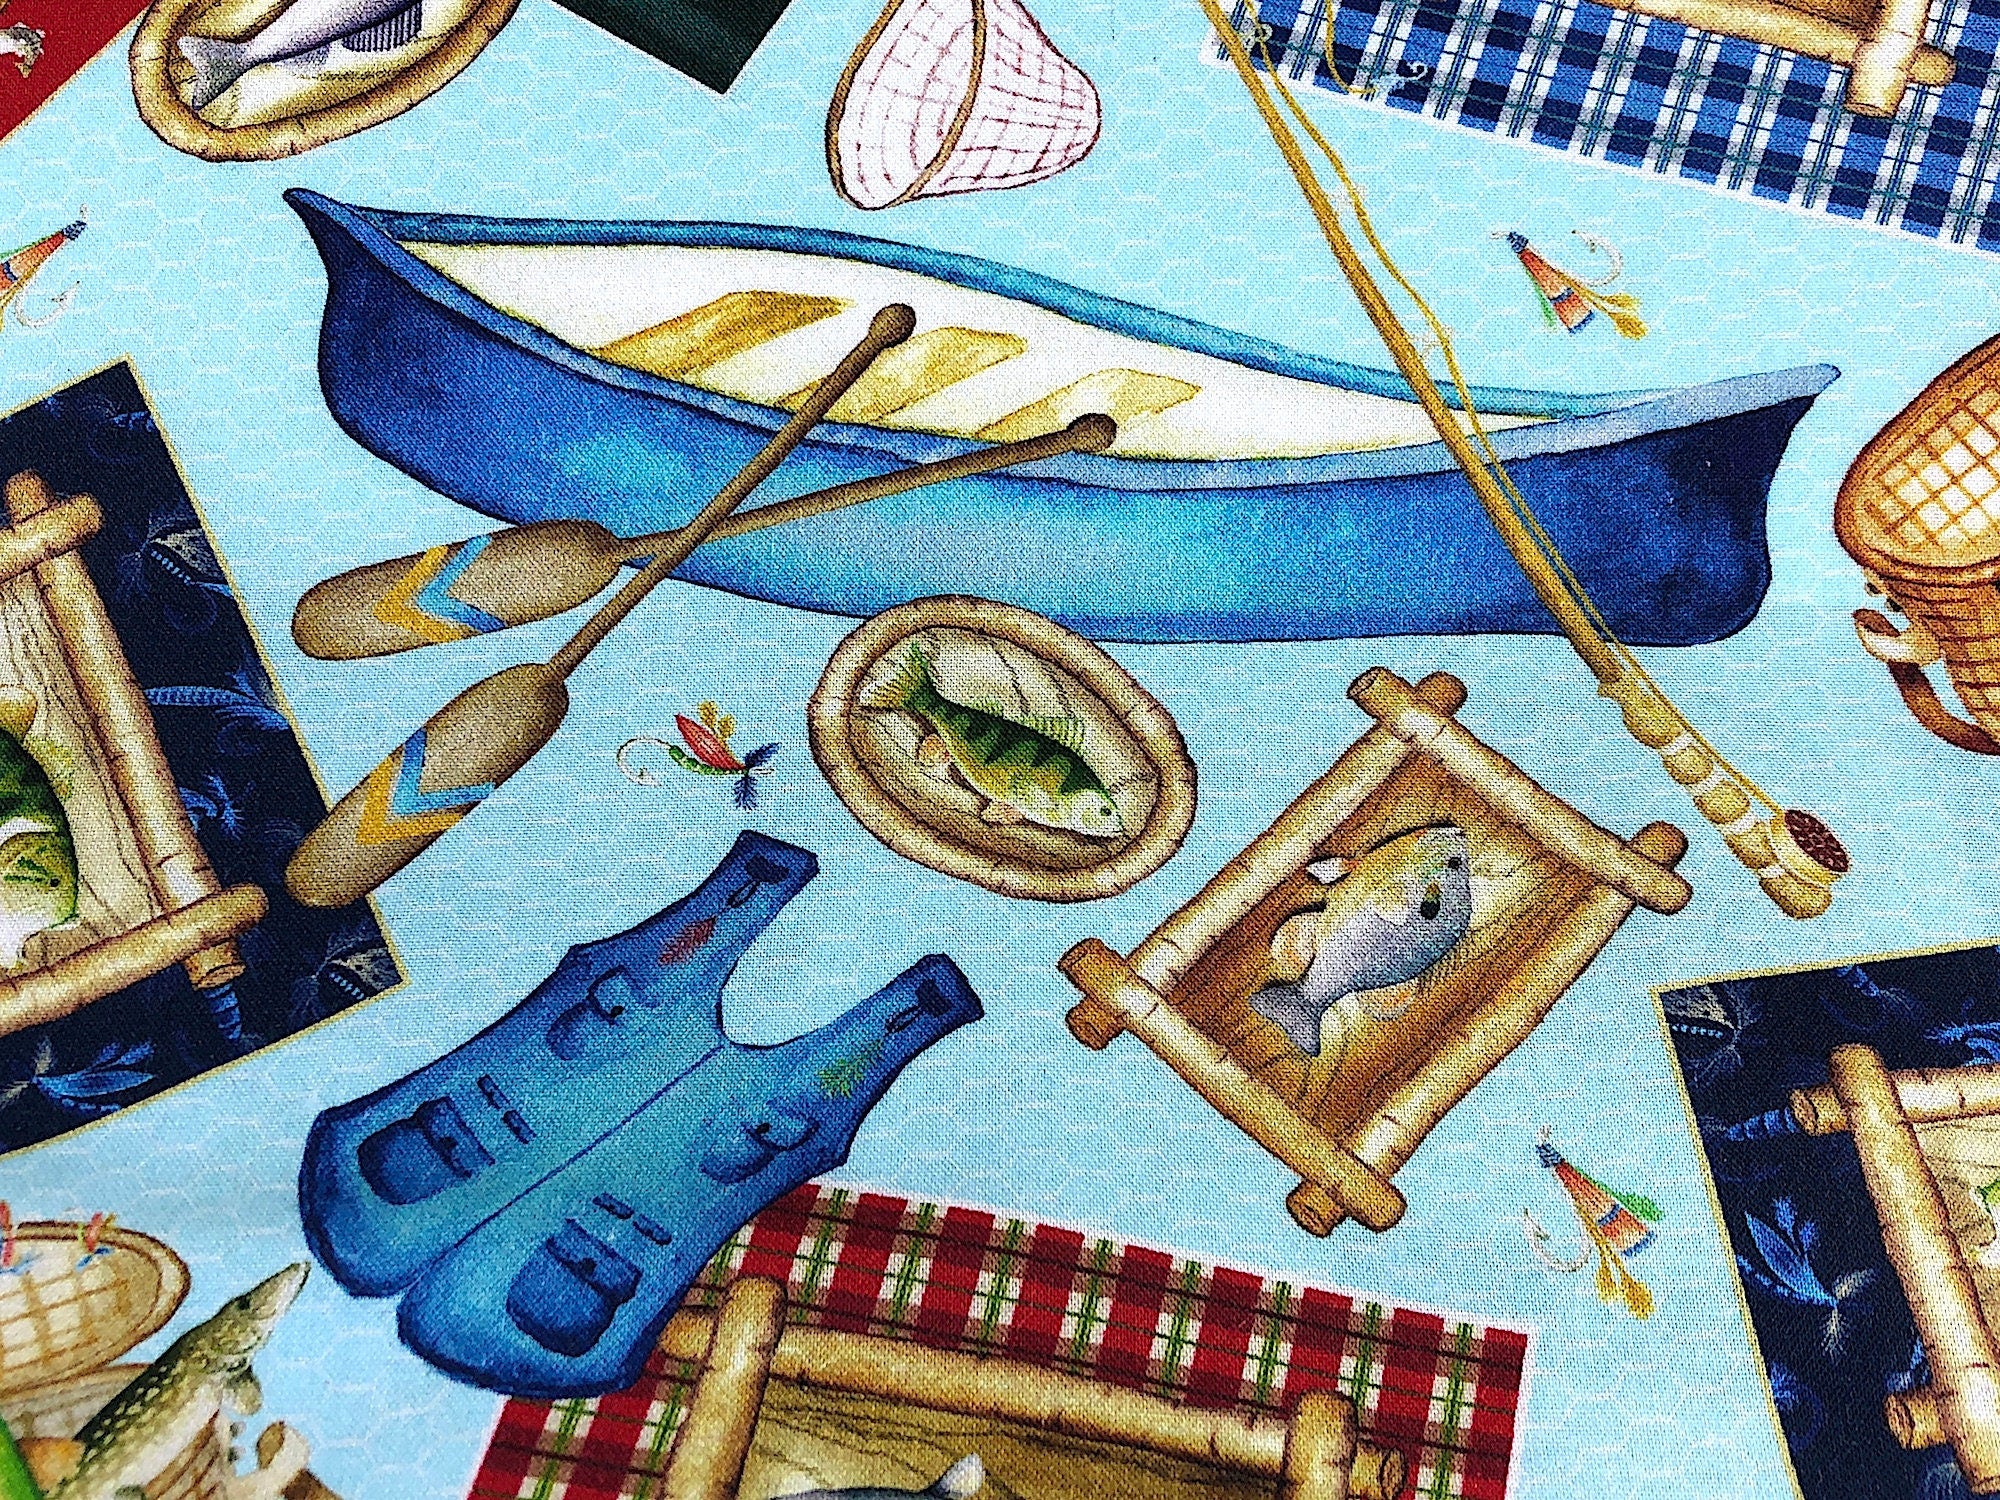 This fabric is part of the Keep it Reel collection and has fish, boats, oars, nets and more on a blue netting background.